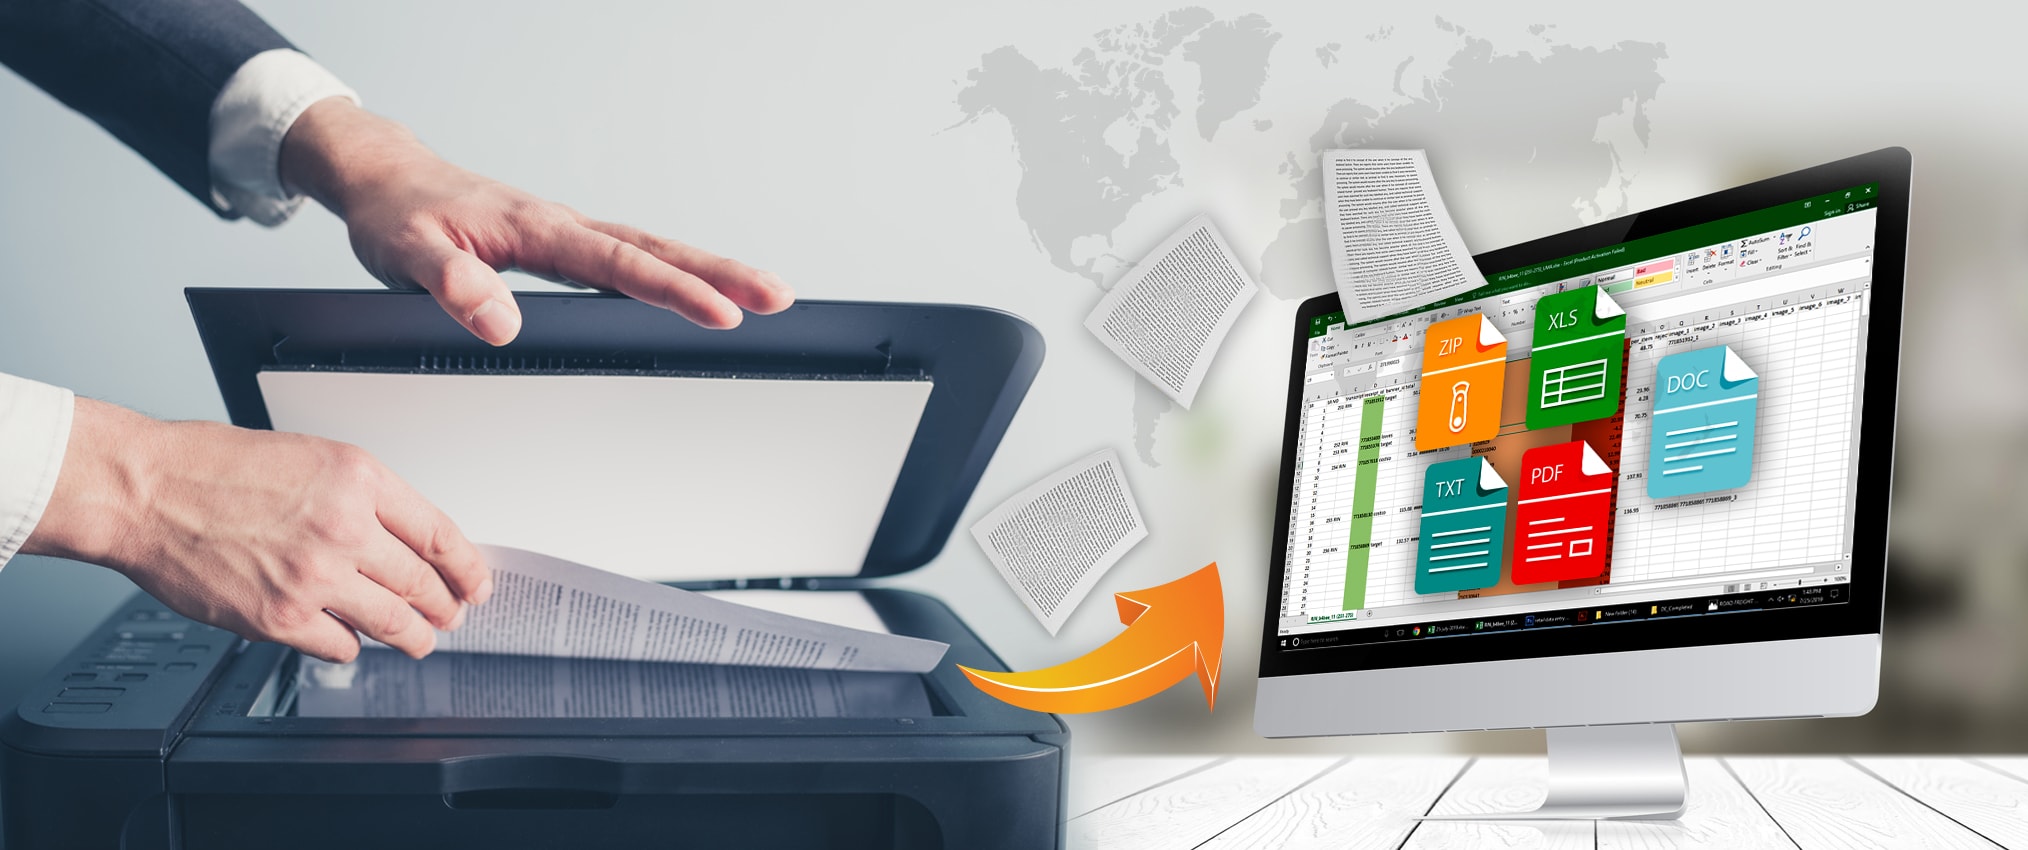 digitize-your-documents-by-outsourcing-document-scanning-services